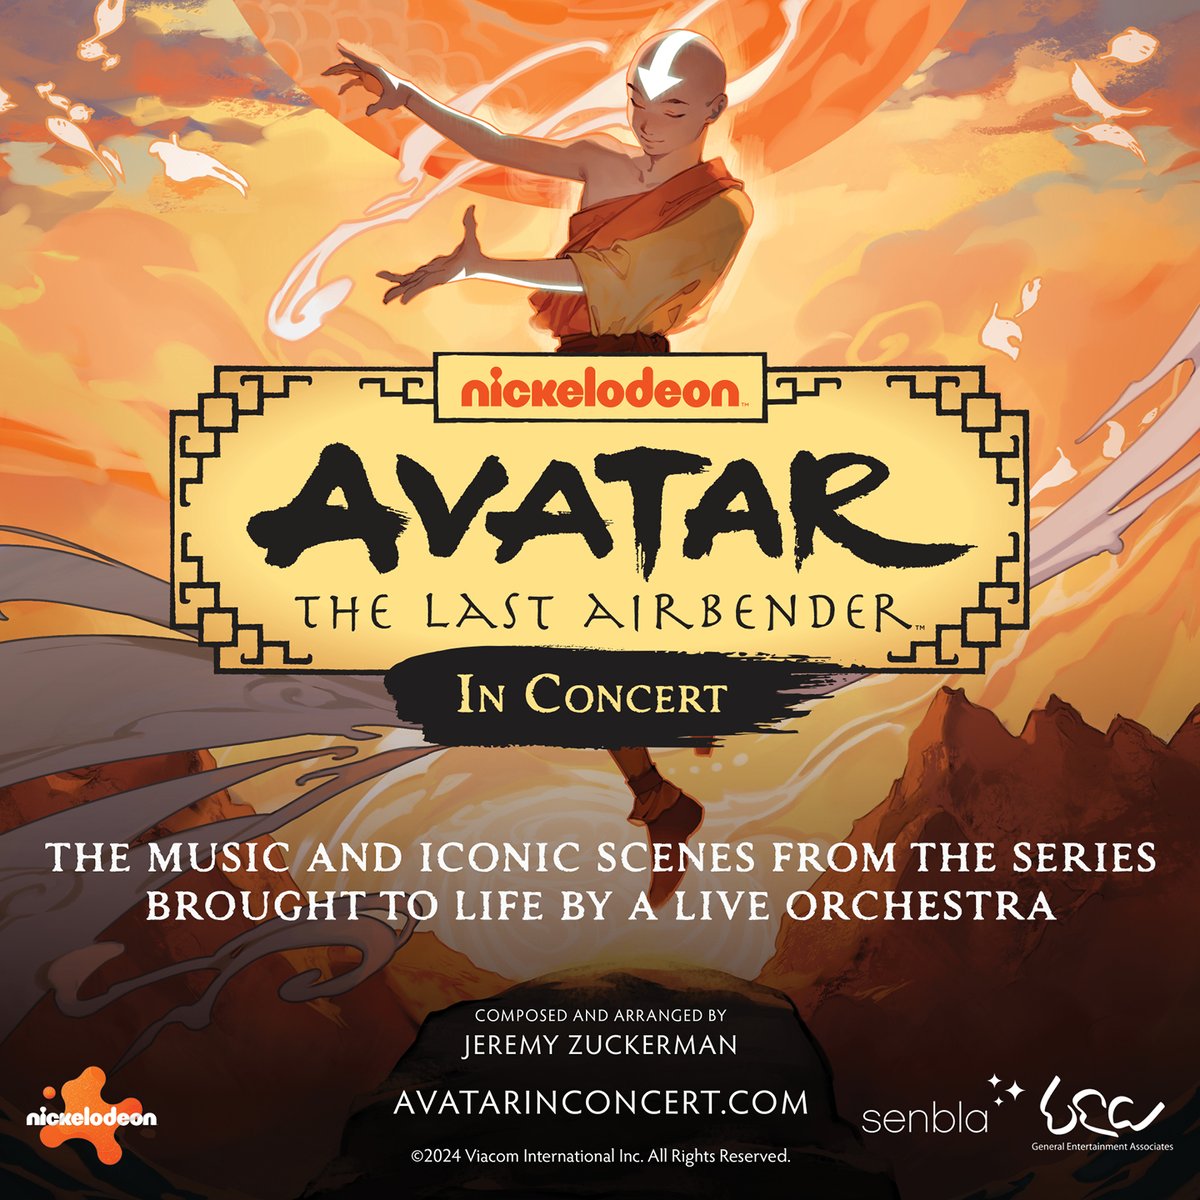 THIS JUST IN! You have PRIORITY ACCESS NOW to tickets to Avatar: The Last Airbender LIVE in Concert, playing our Belk Theater October 15th, before they go on sale to the public tomorrow at 10am! To take advantage of this special presale offer, visit: bit.ly/AvatarSOCIAL